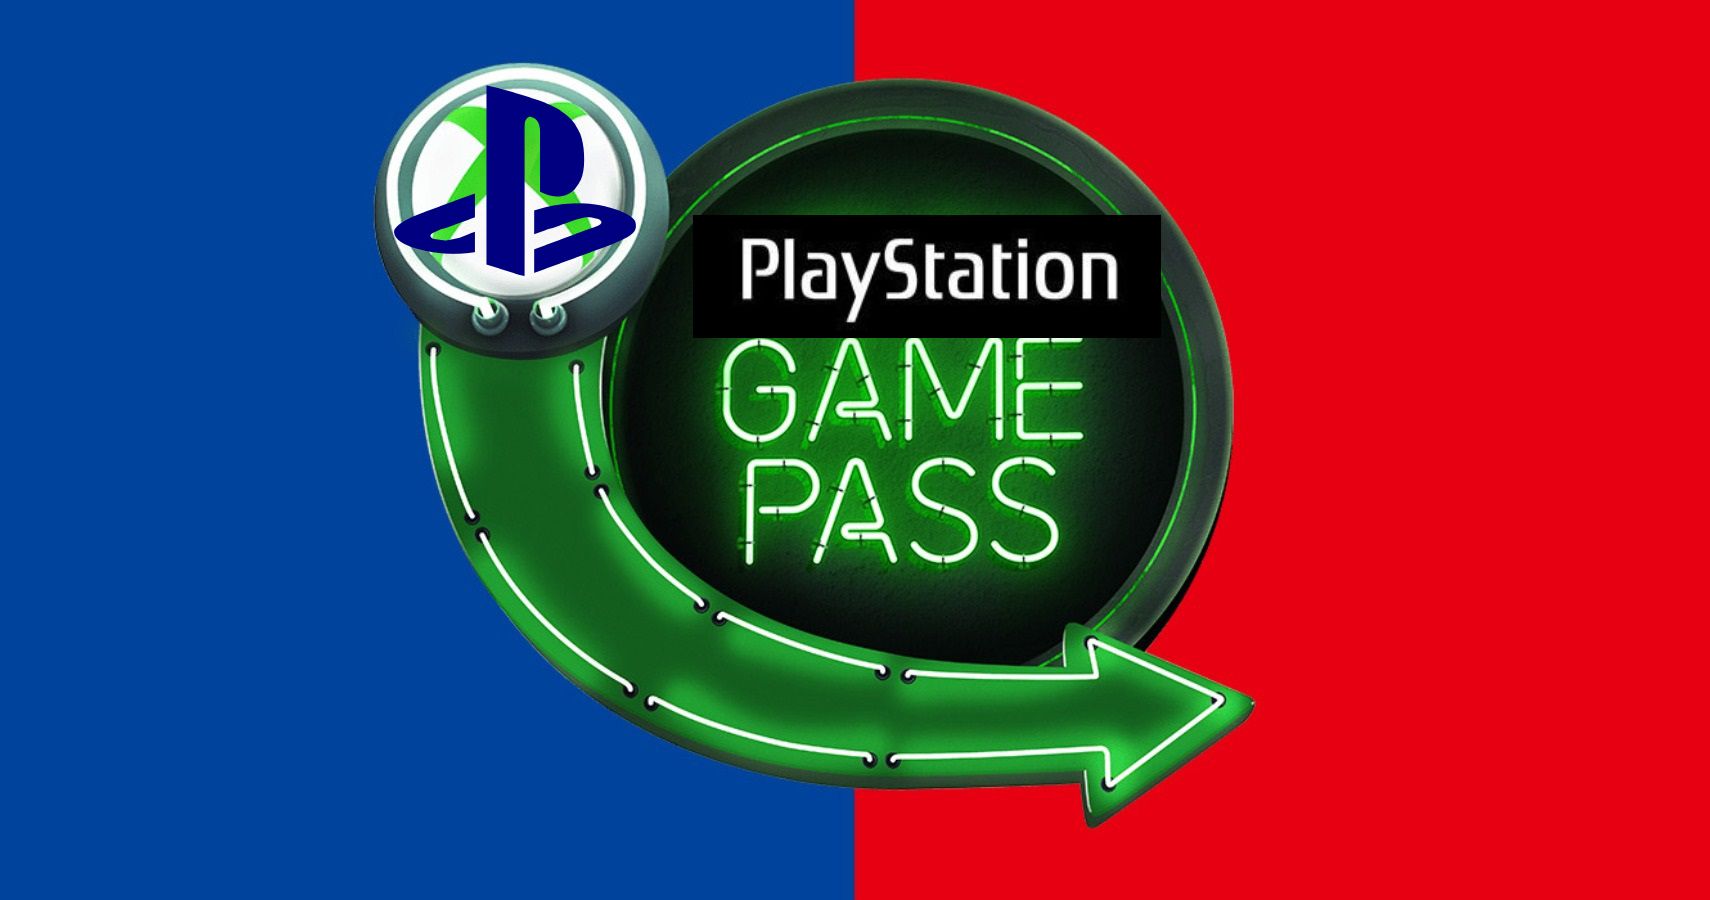 can.you.buy game pass for playstation 4